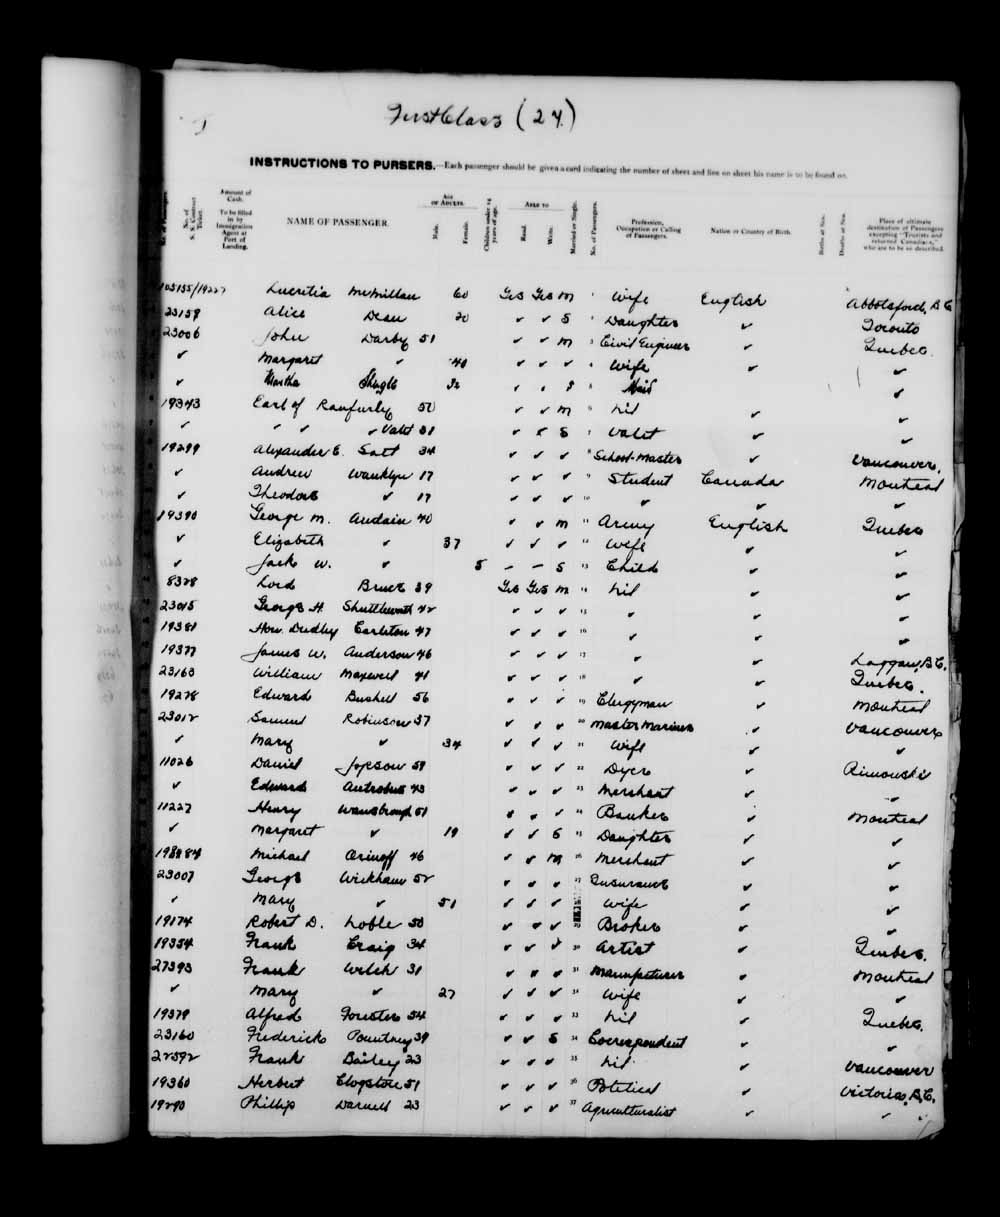 Digitized page of Quebec Passenger Lists for Image No.: e003591278